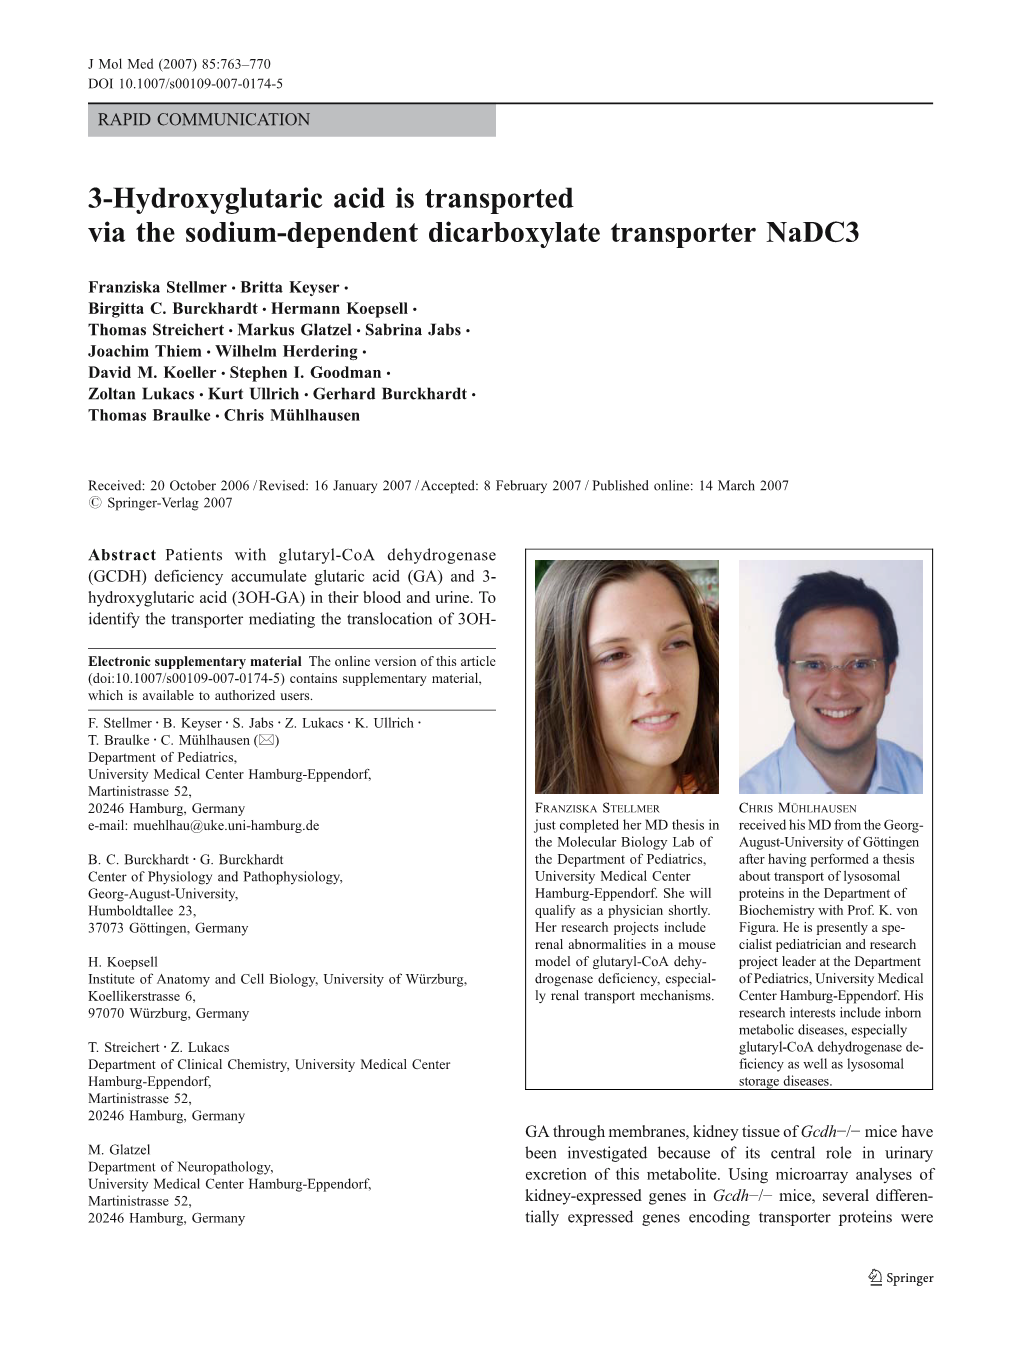 3-Hydroxyglutaric Acid Is Transported Via the Sodium-Dependent Dicarboxylate Transporter Nadc3